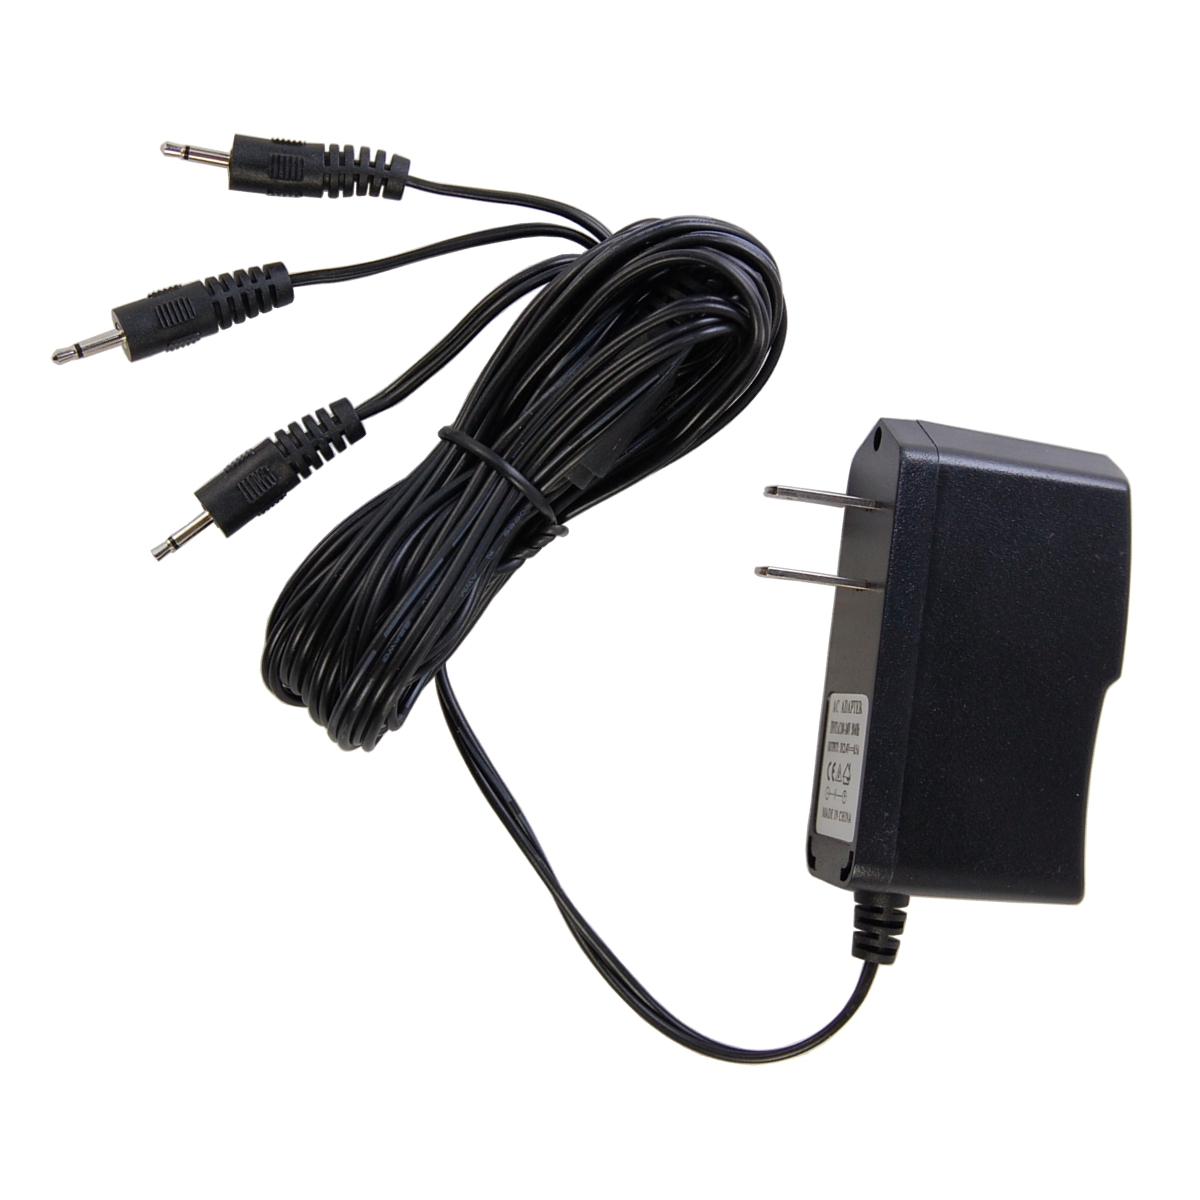 HQRP AC Adapter for Department 56 Hockey Practice 56.52512 Snow Village Power Supply Cord